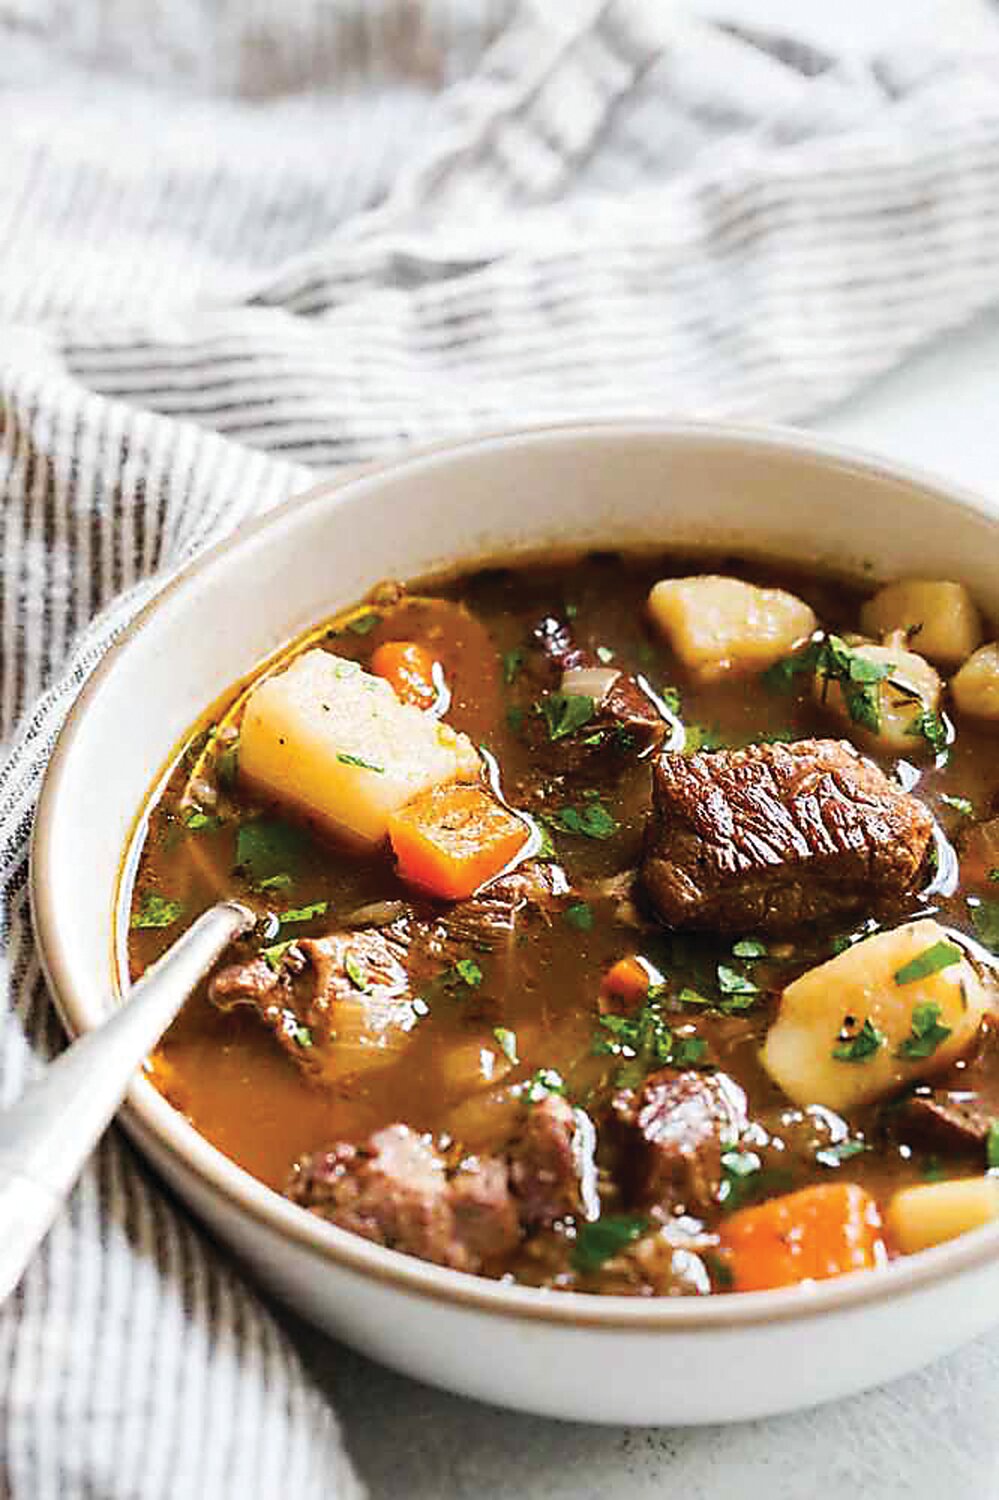 Irish stew is a good choice for dining at home on St. Patrick’s Day or any cold, blustery evening.